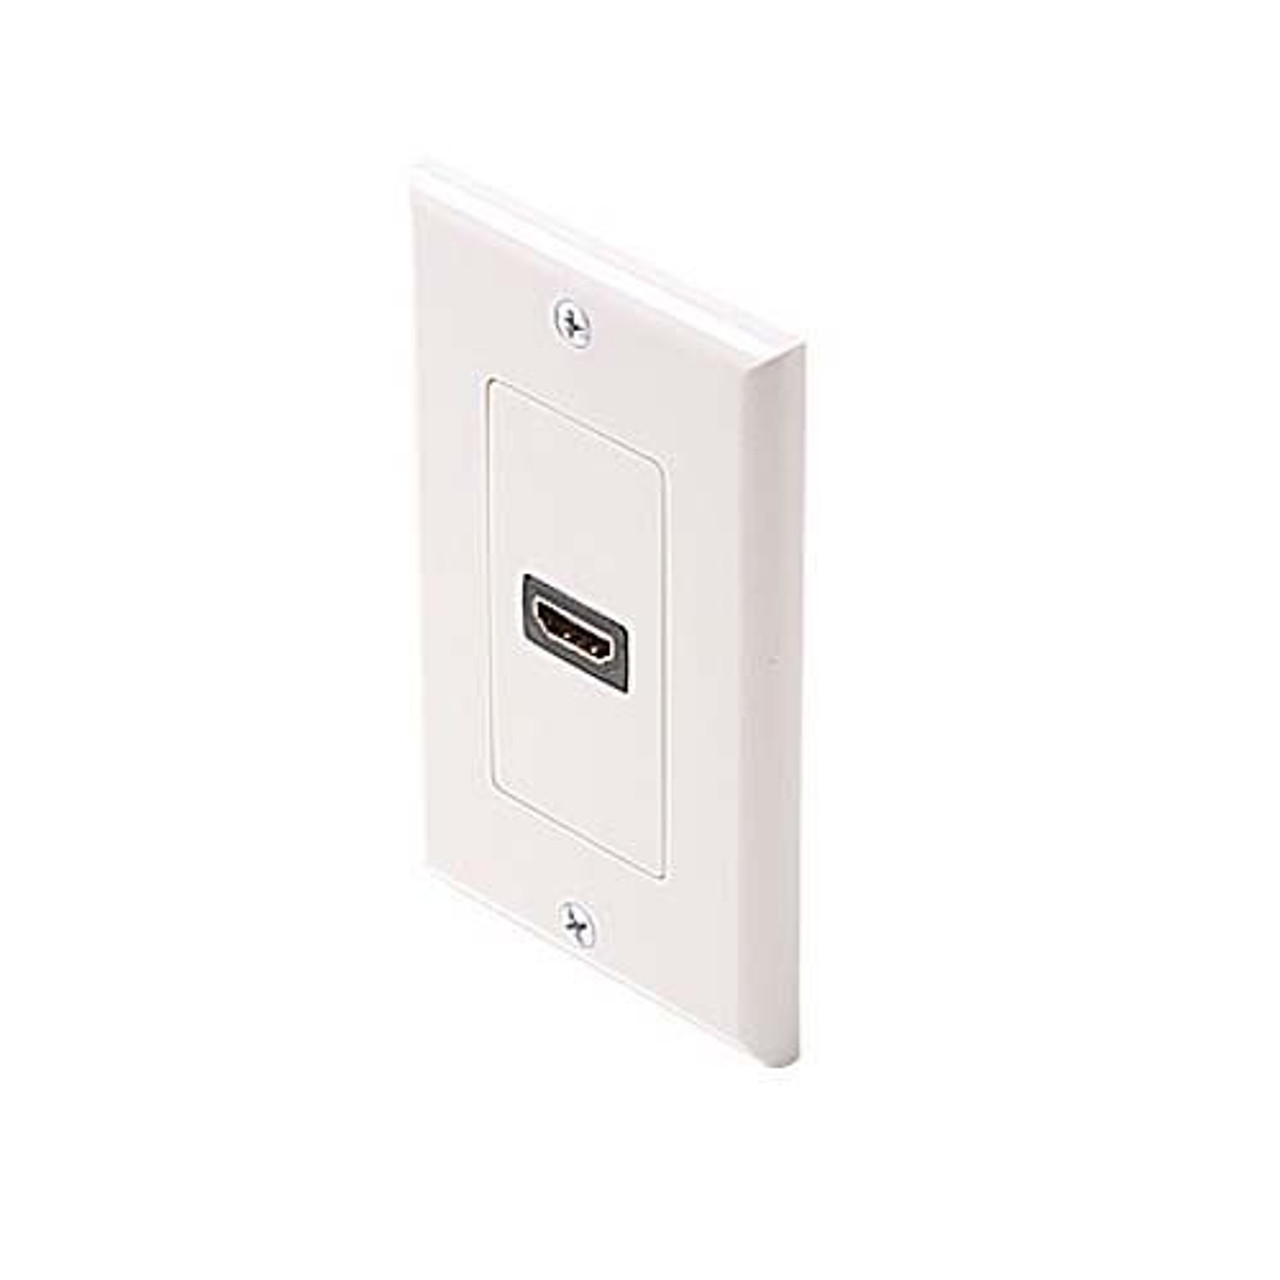 Steren 516-101WH HDMI to HDMI Wall Plate White Audio Video Single HDMI Feed Thru Decorator Wall Plate HDMI Female to HDMI Female